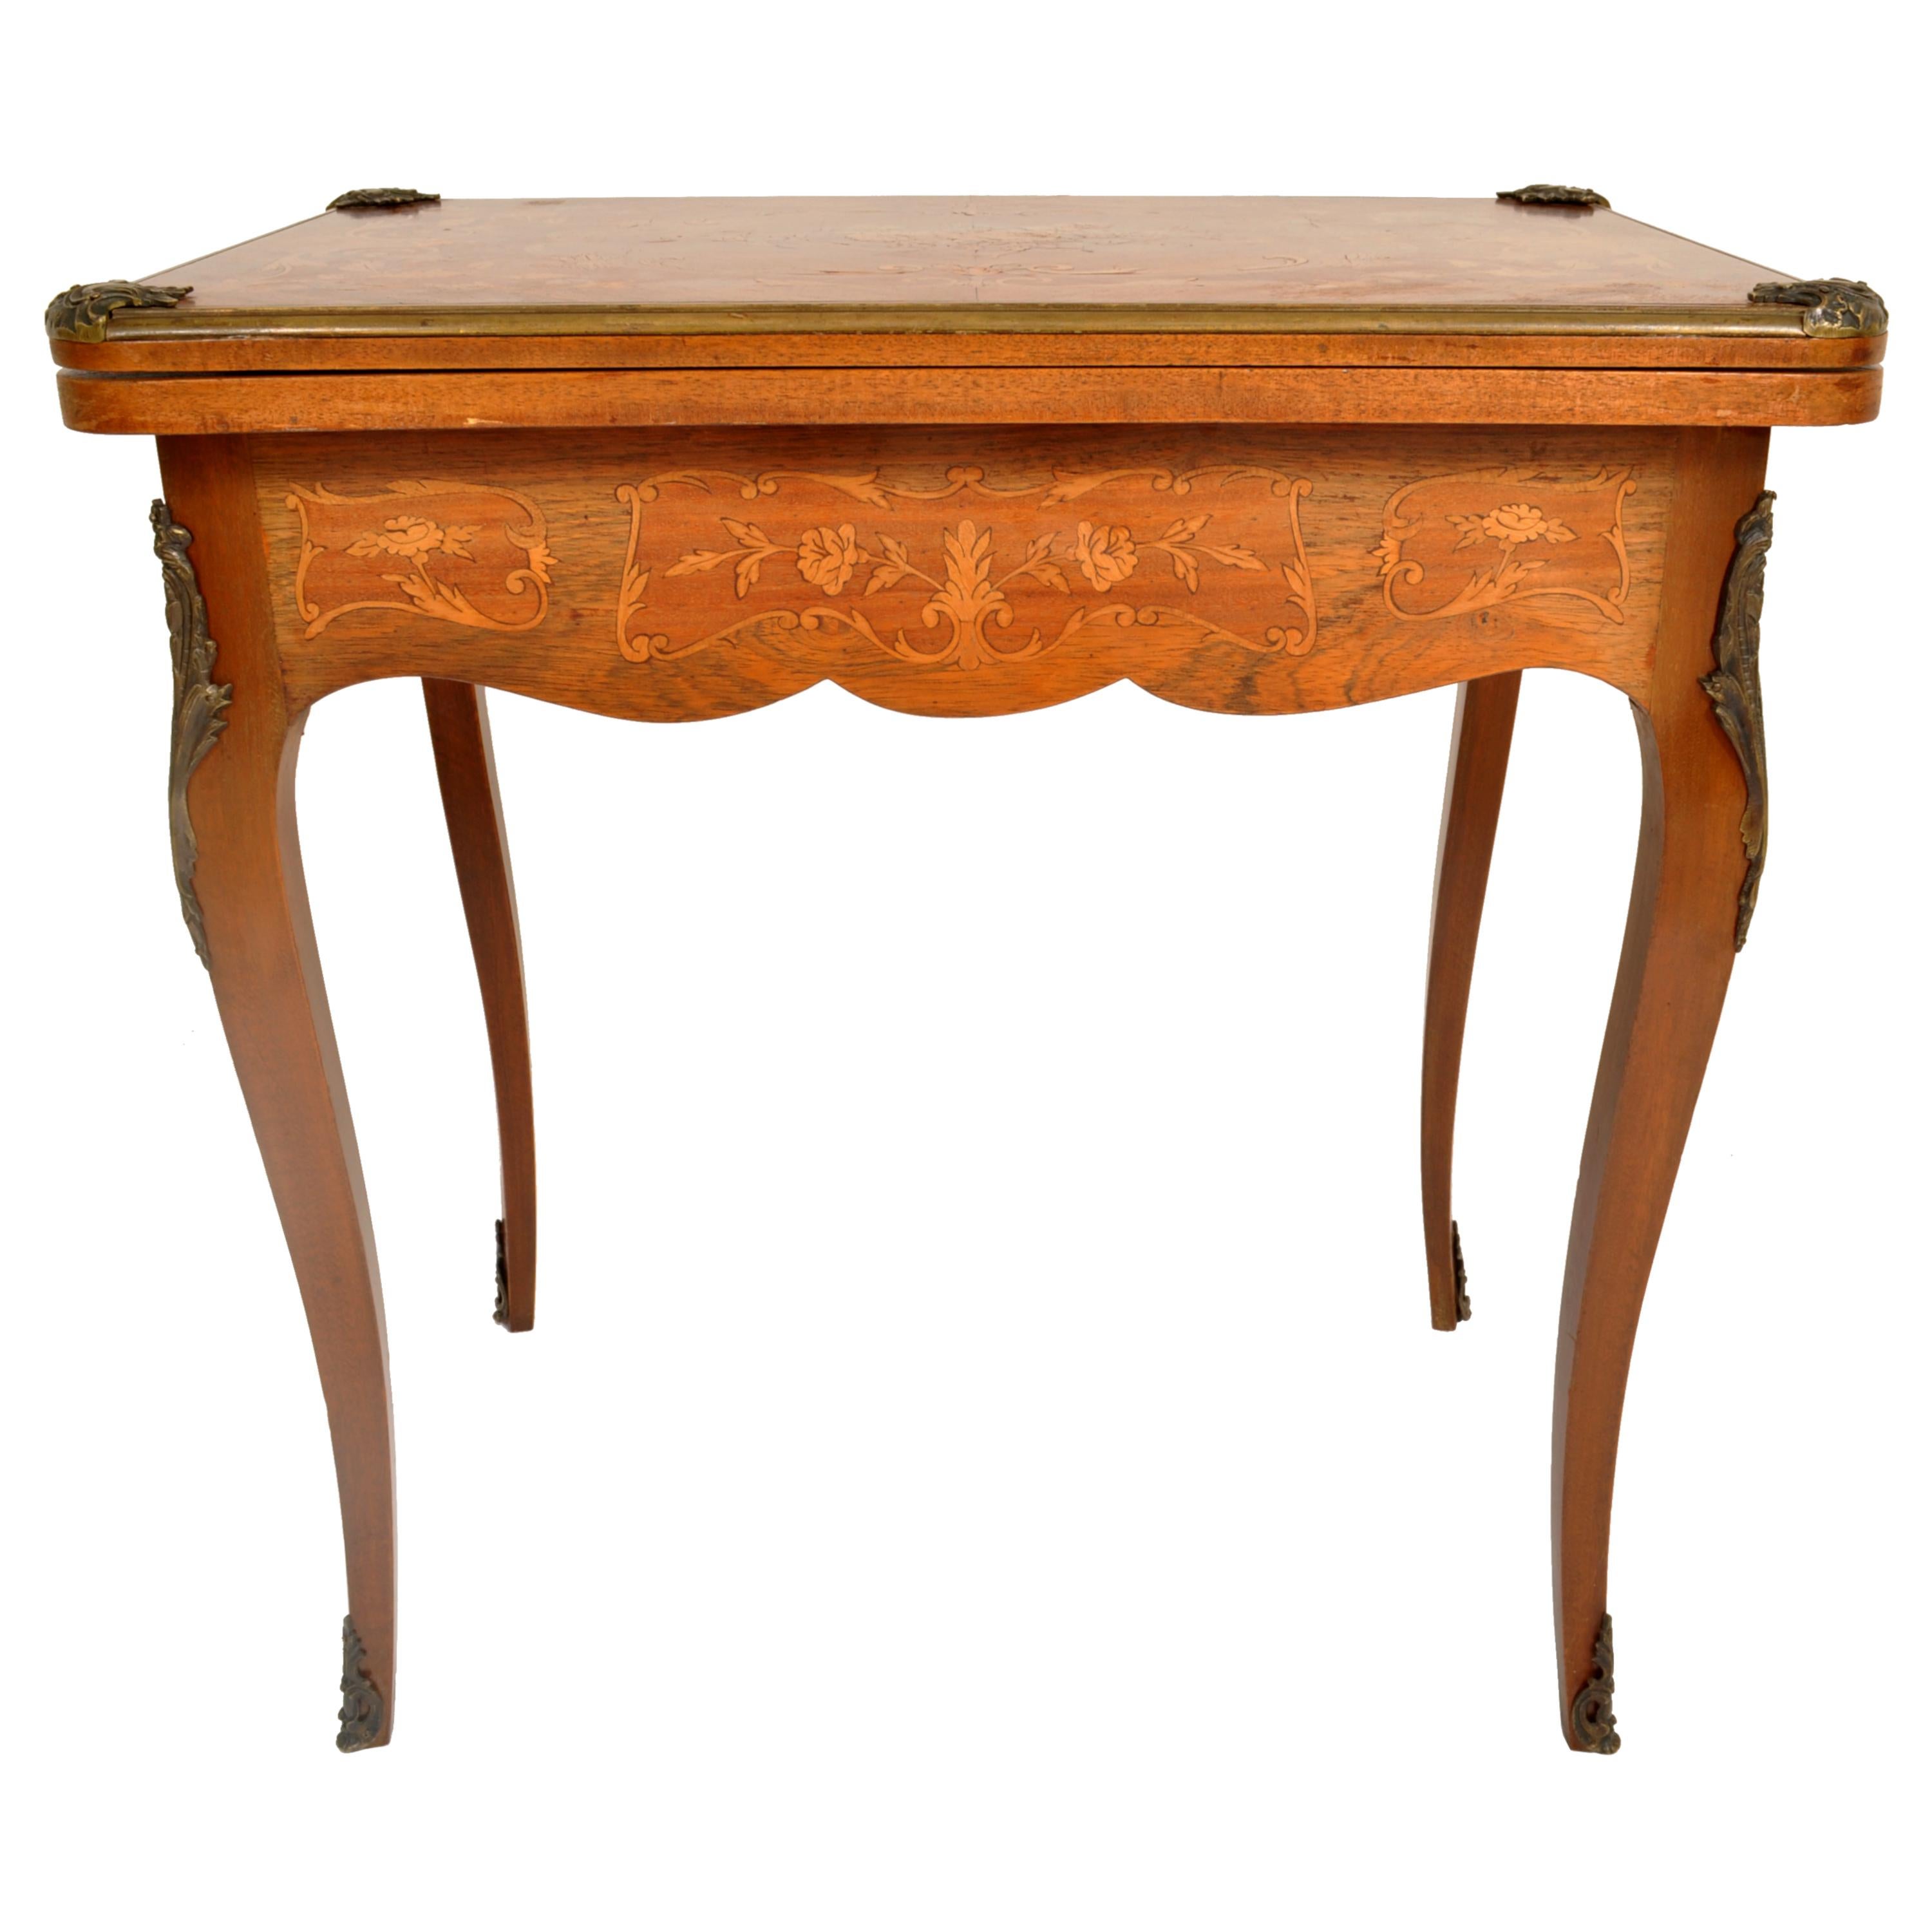 Antique French Louis XVI Walnut Fruitwood Inlaid Ormolu Card Games Table, 1880 For Sale 3